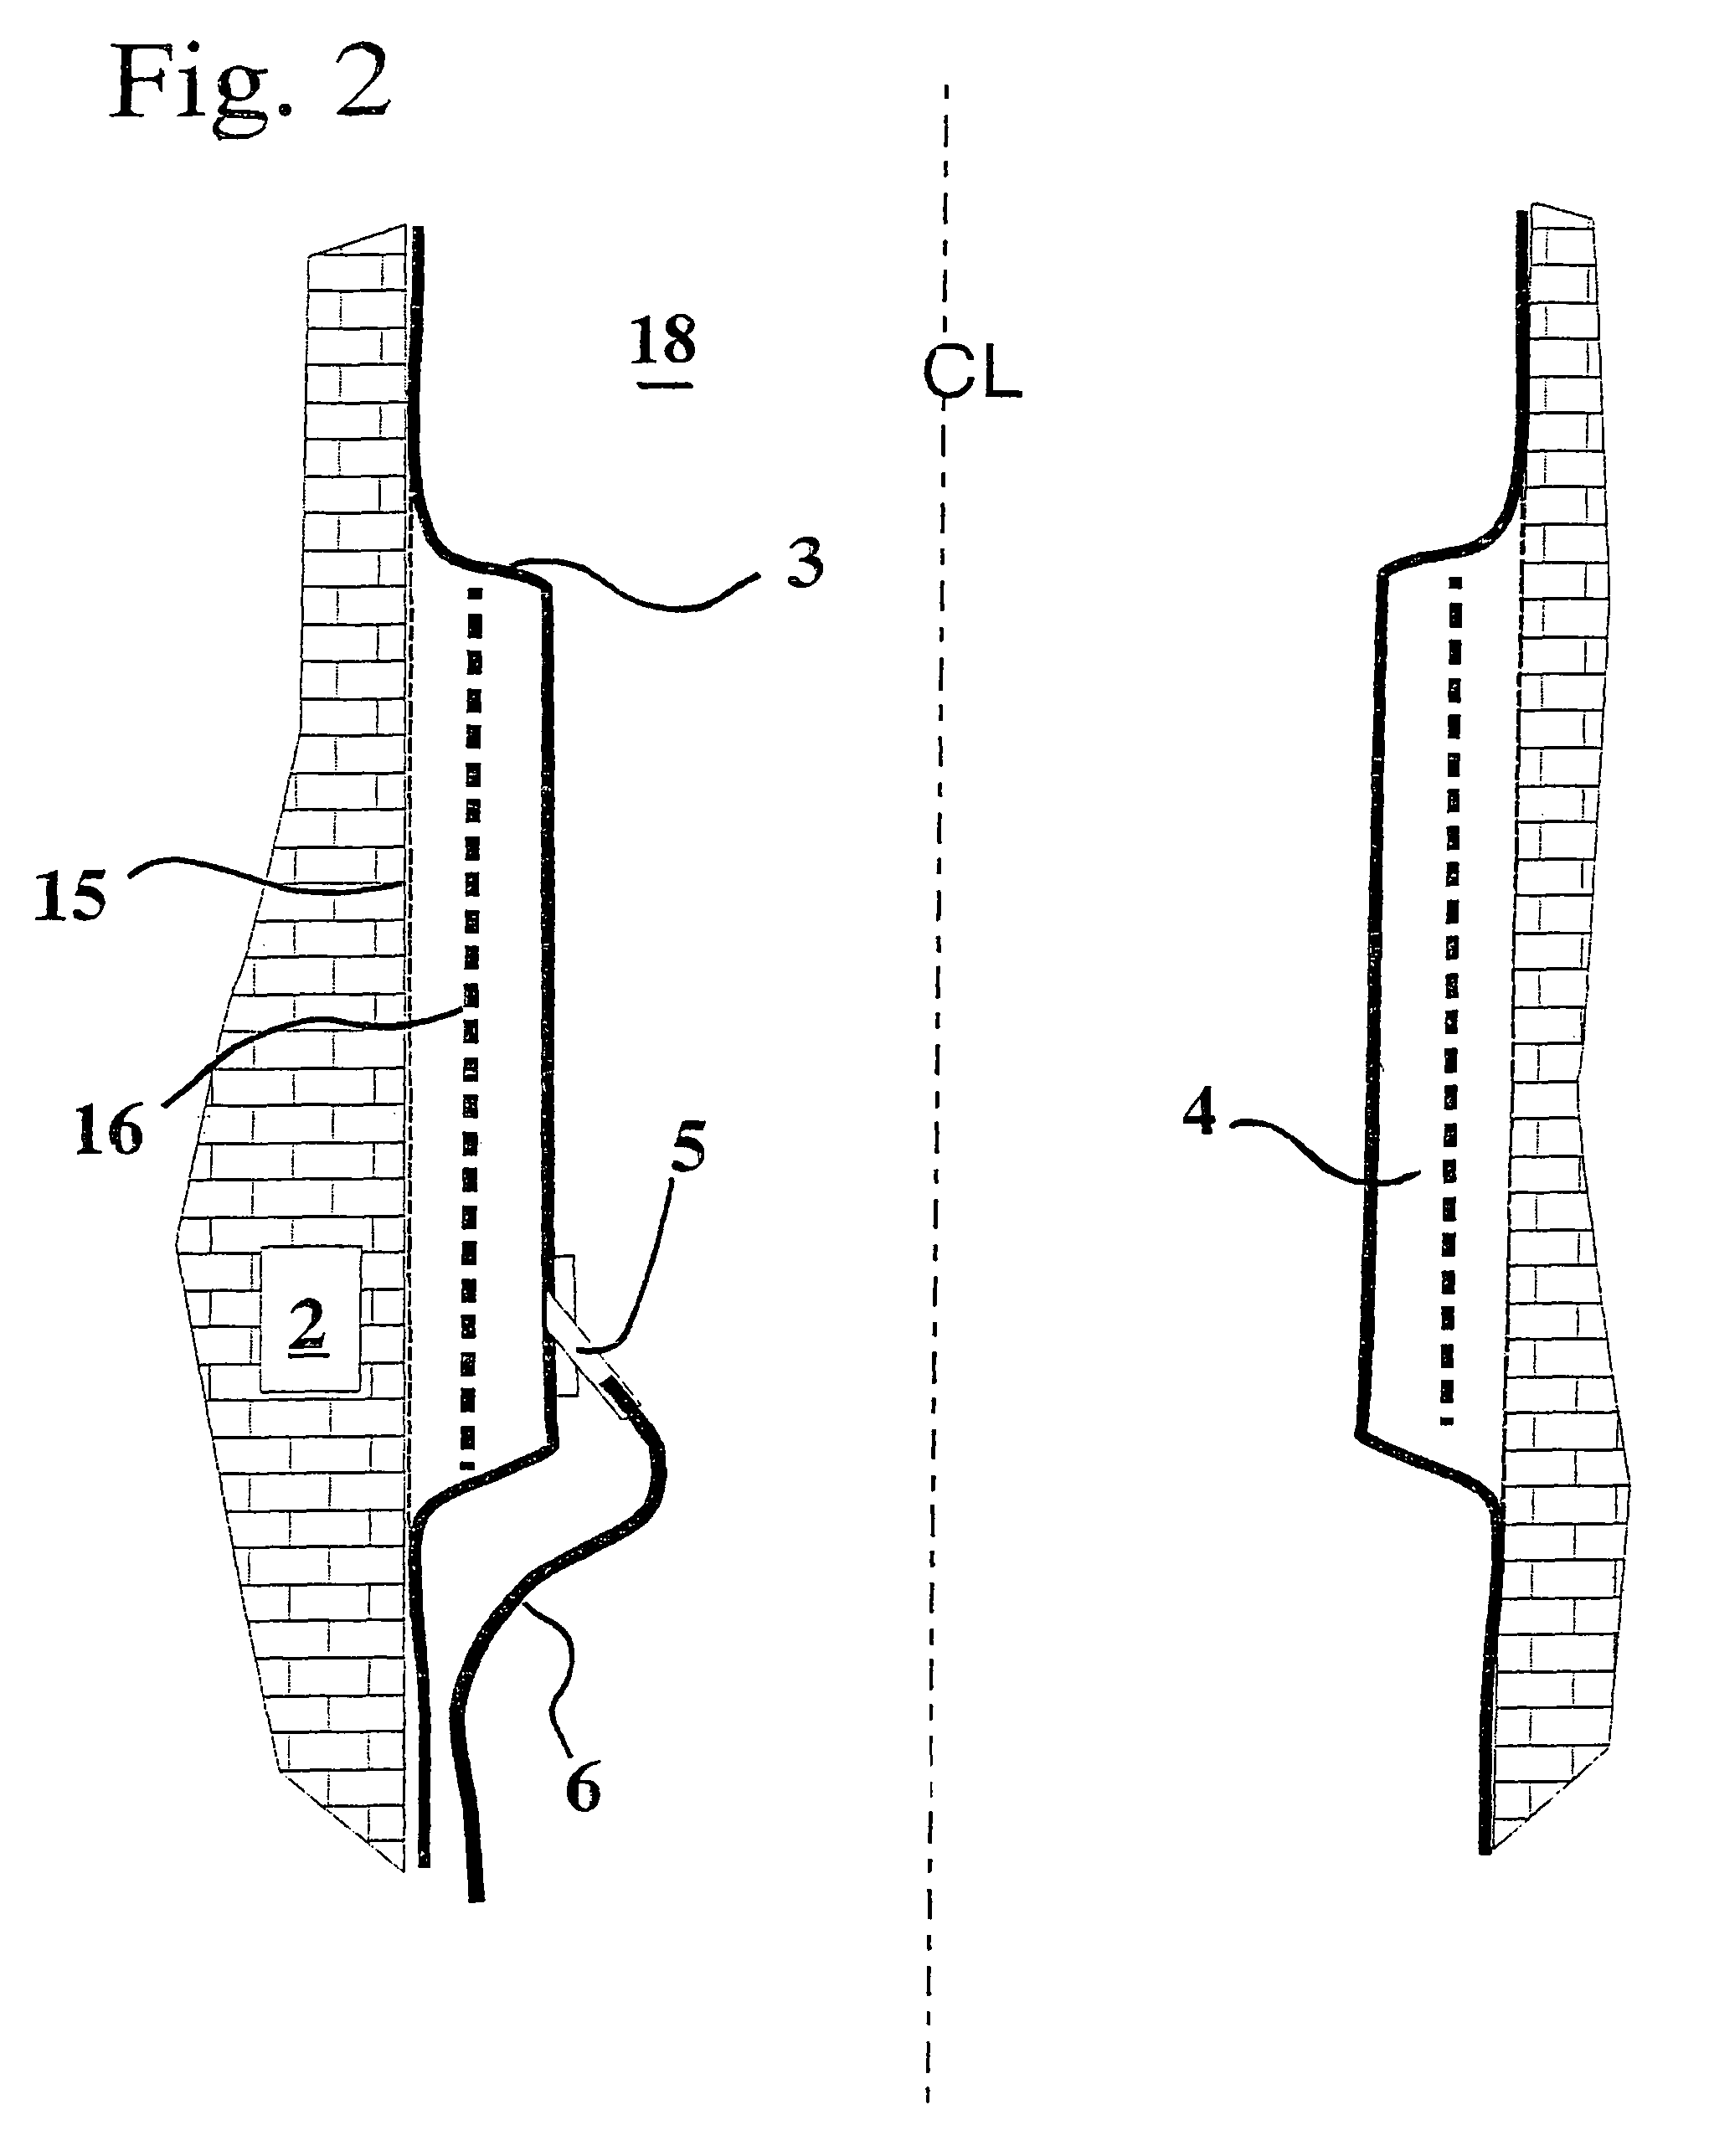 Flexible borehole liner with diffusion barrier and method of use thereof